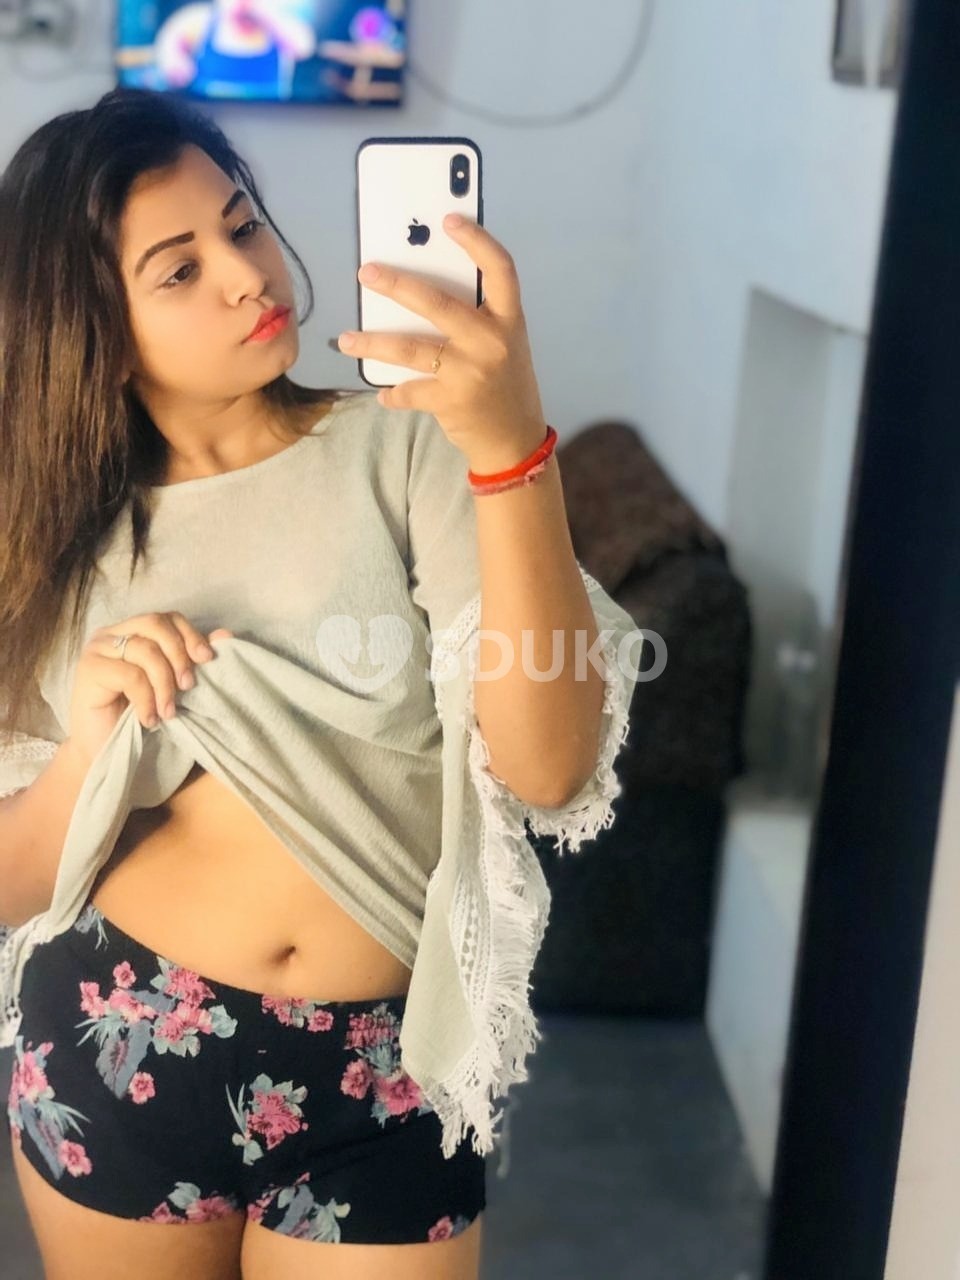 HOSUR LOW RATE (Ritika) ESCORT FULL HARD FUCK WITH NAUGHTY IF YOU WANT TO FUCK MY PUSSY WITH BIG BOOBS